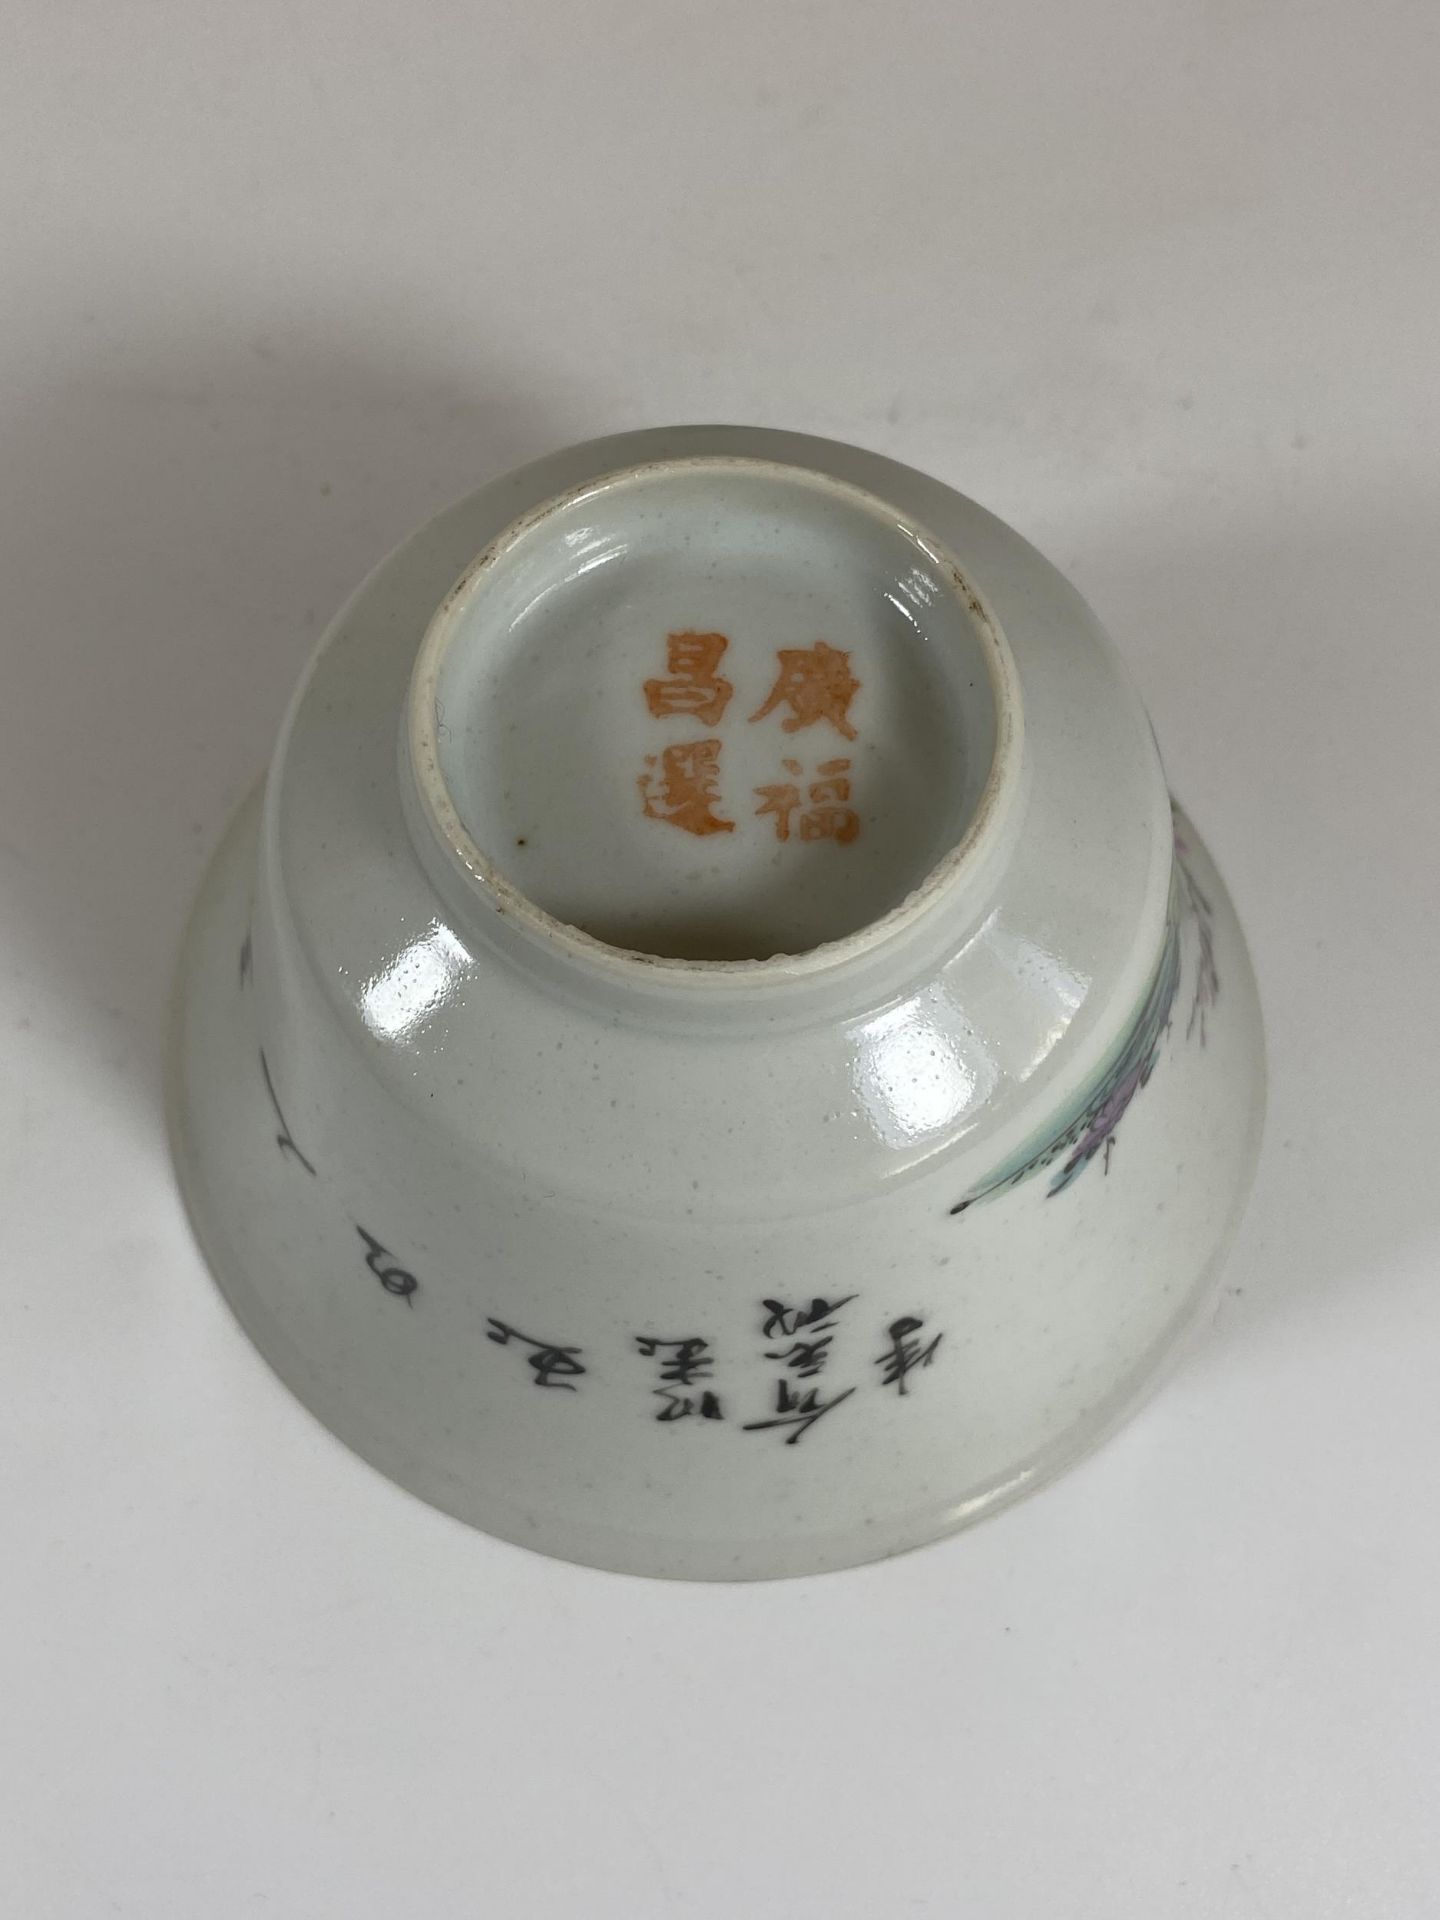 AN EARLY 20TH CENTURY CHINESE PORCELAIN BOWL WITH FIGURES DESIGN, FOUR CHARACTER MARK TO BASE, - Image 3 of 4